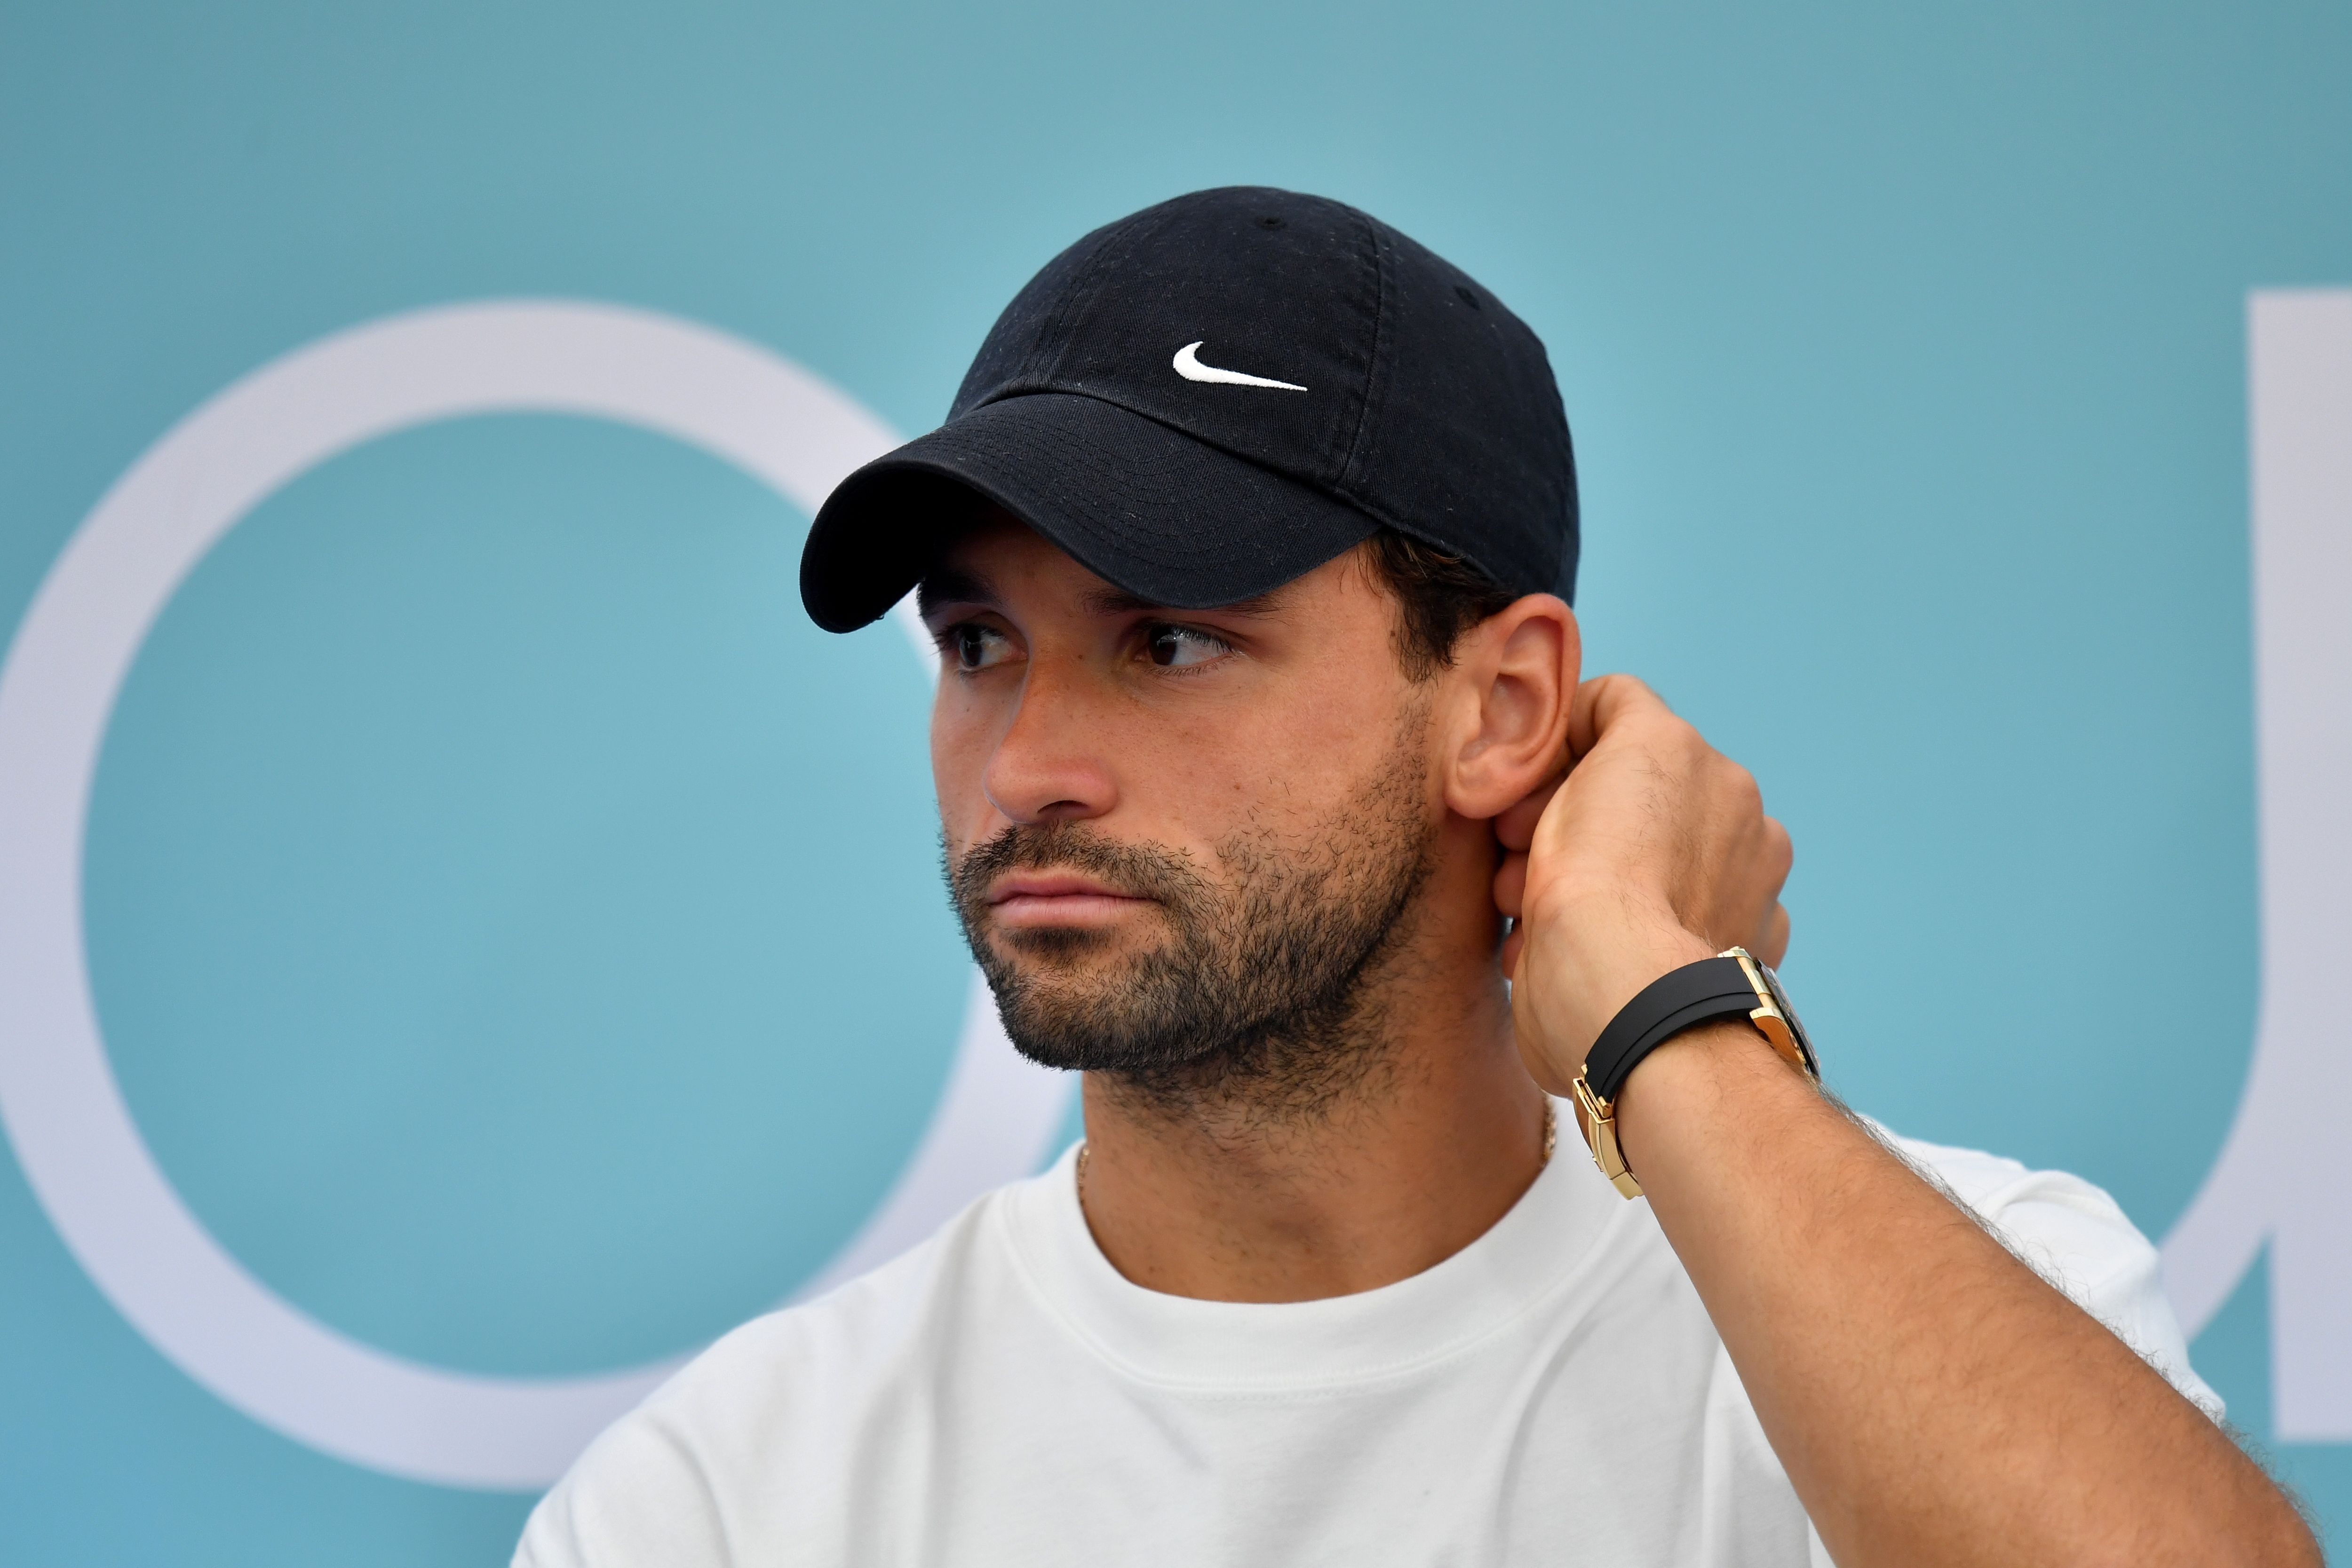 The Rally Grigor Dimitrovs positive test and tennis plans to return